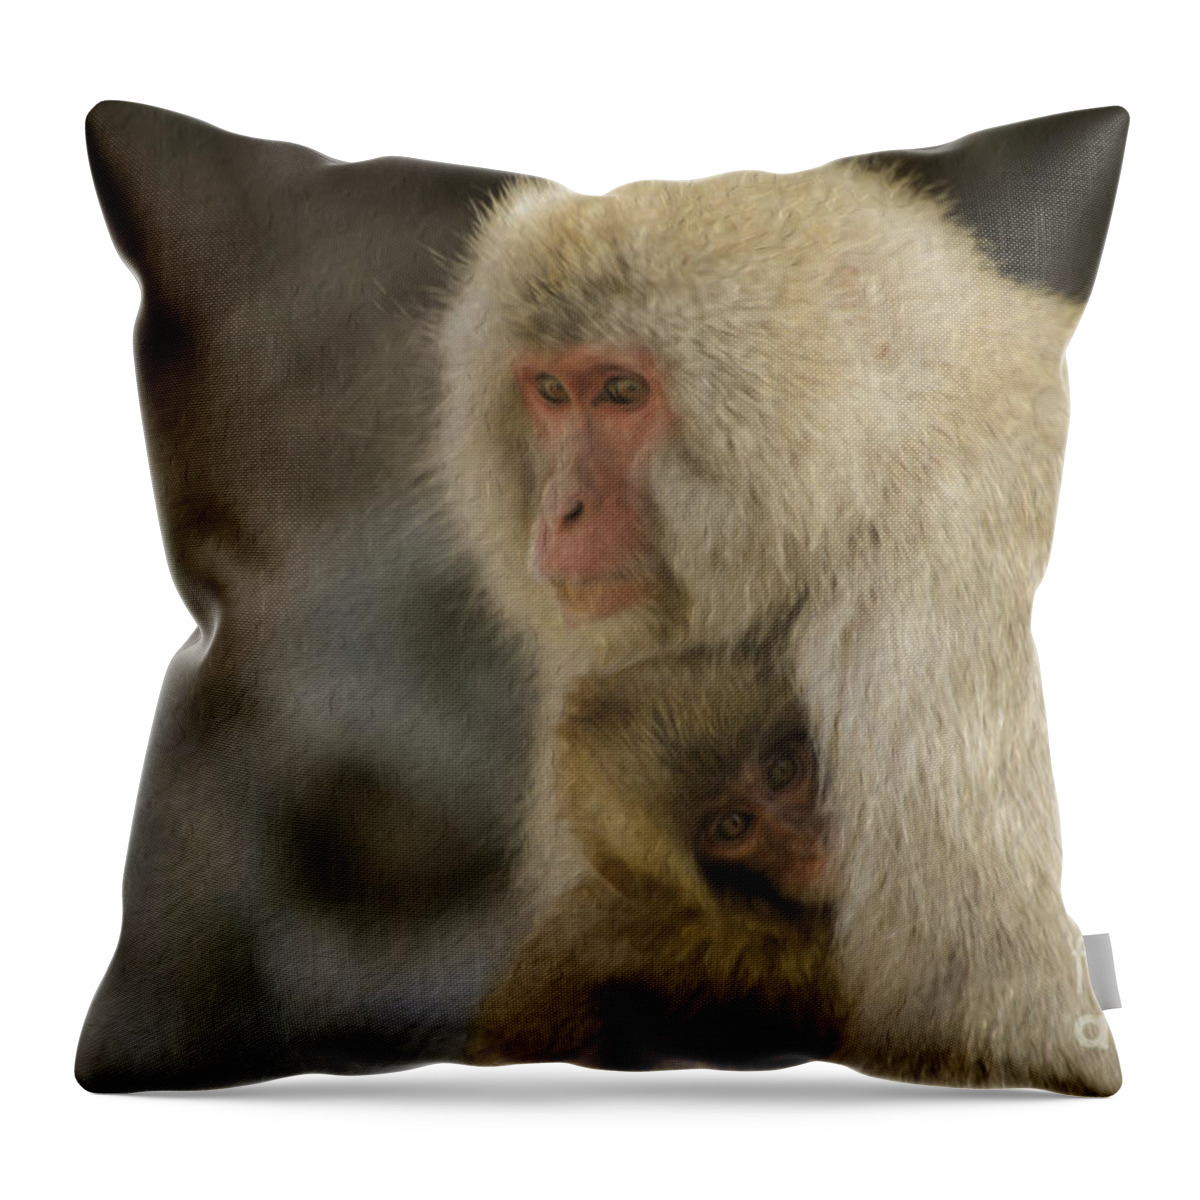 Japan Throw Pillow featuring the painting My Momma Snow Monkey by Robyn Saunders